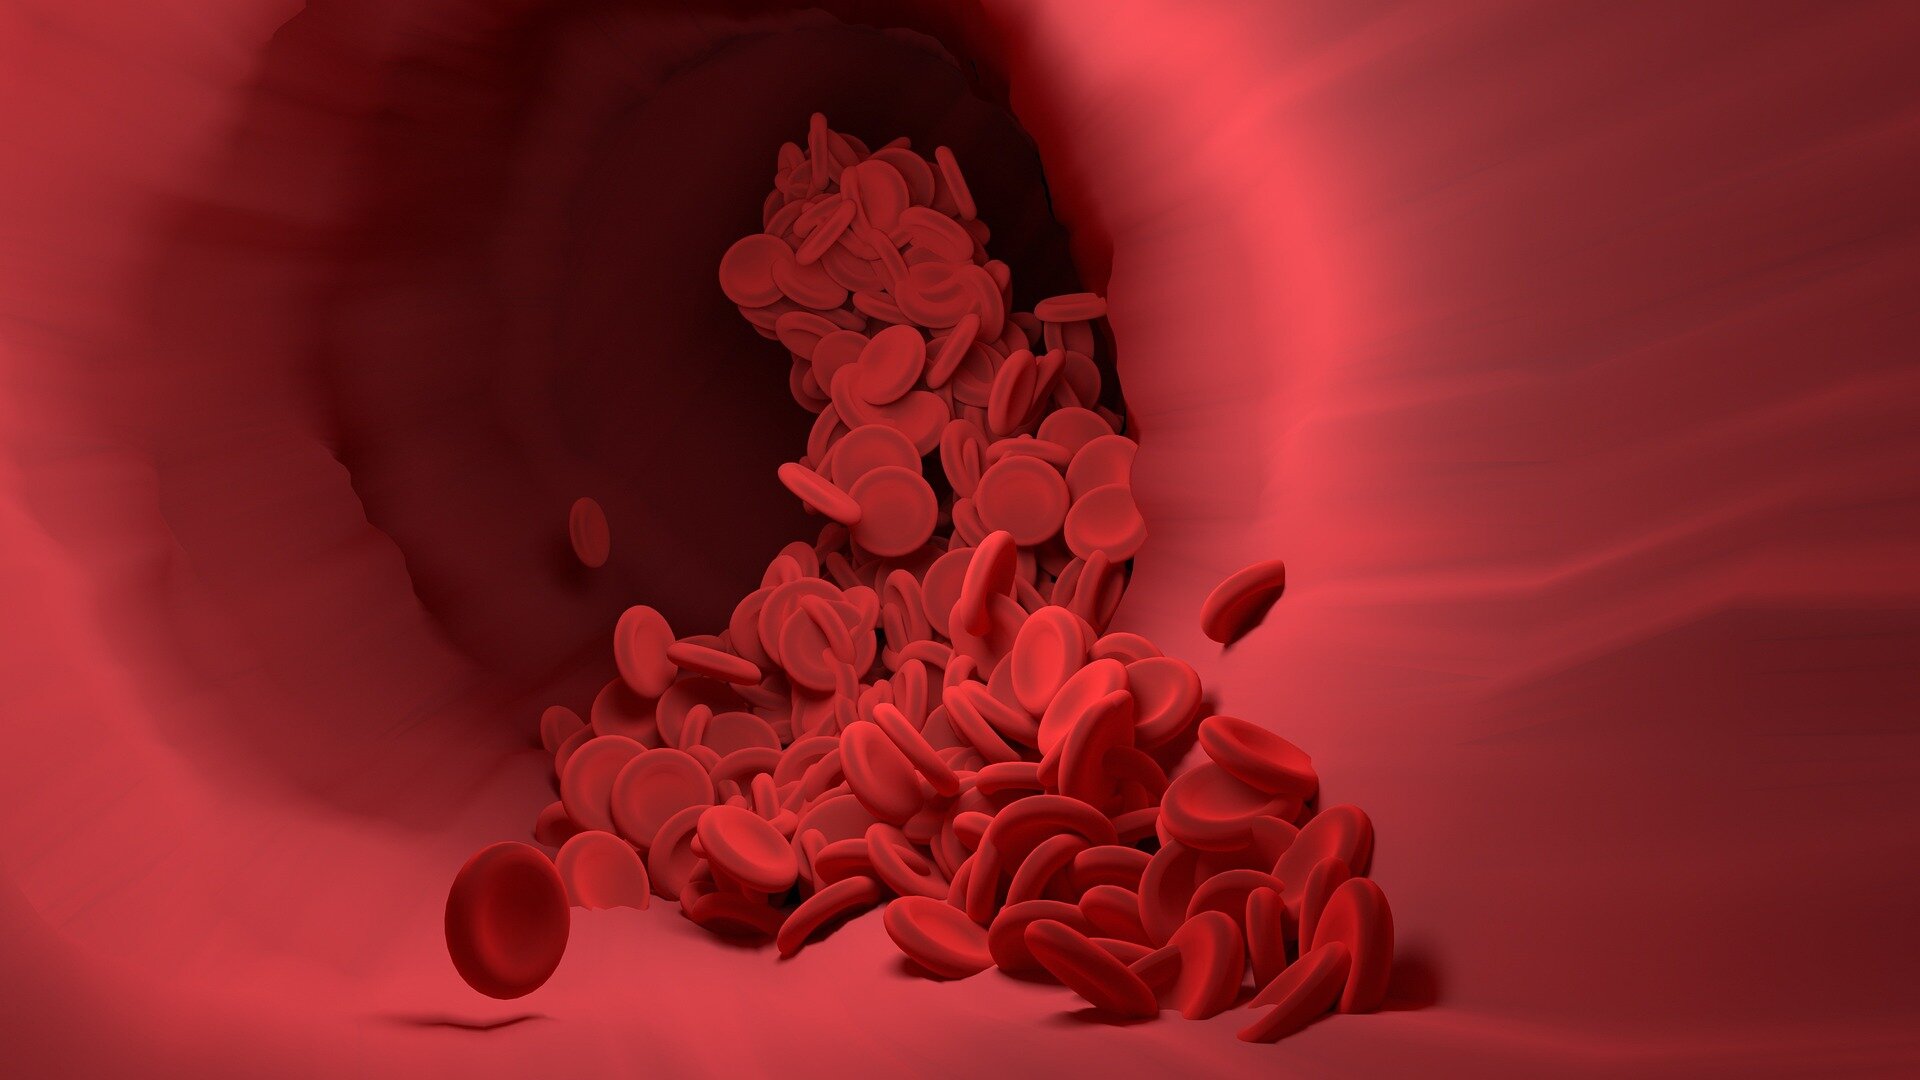 #Potent results from a new immune treatment seen in patients with hard-to-treat blood cancers